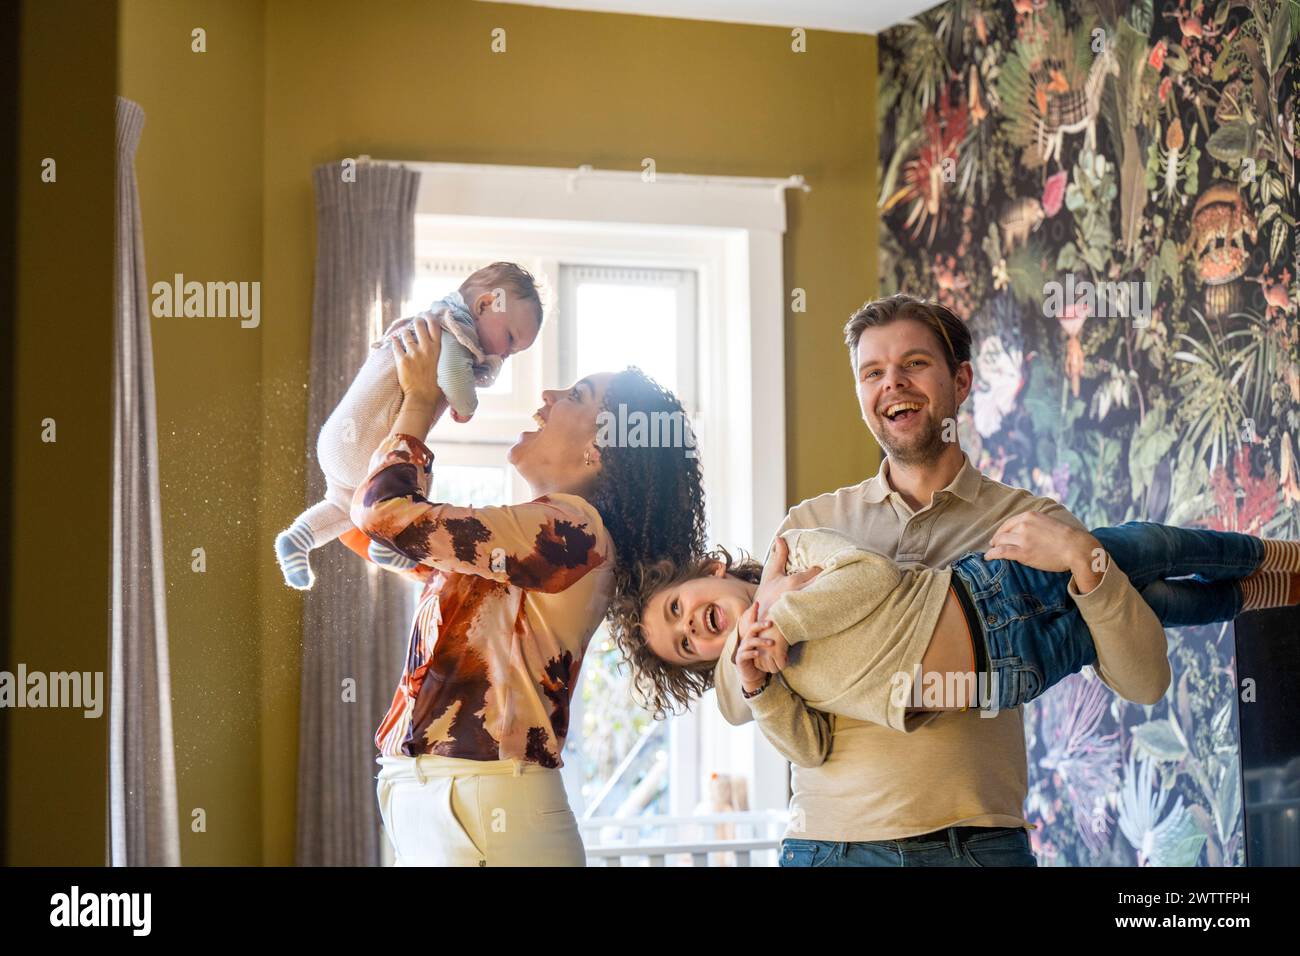 Family fun time as a parent lifts a joyful child into the air in a cozy home setting. Stock Photo